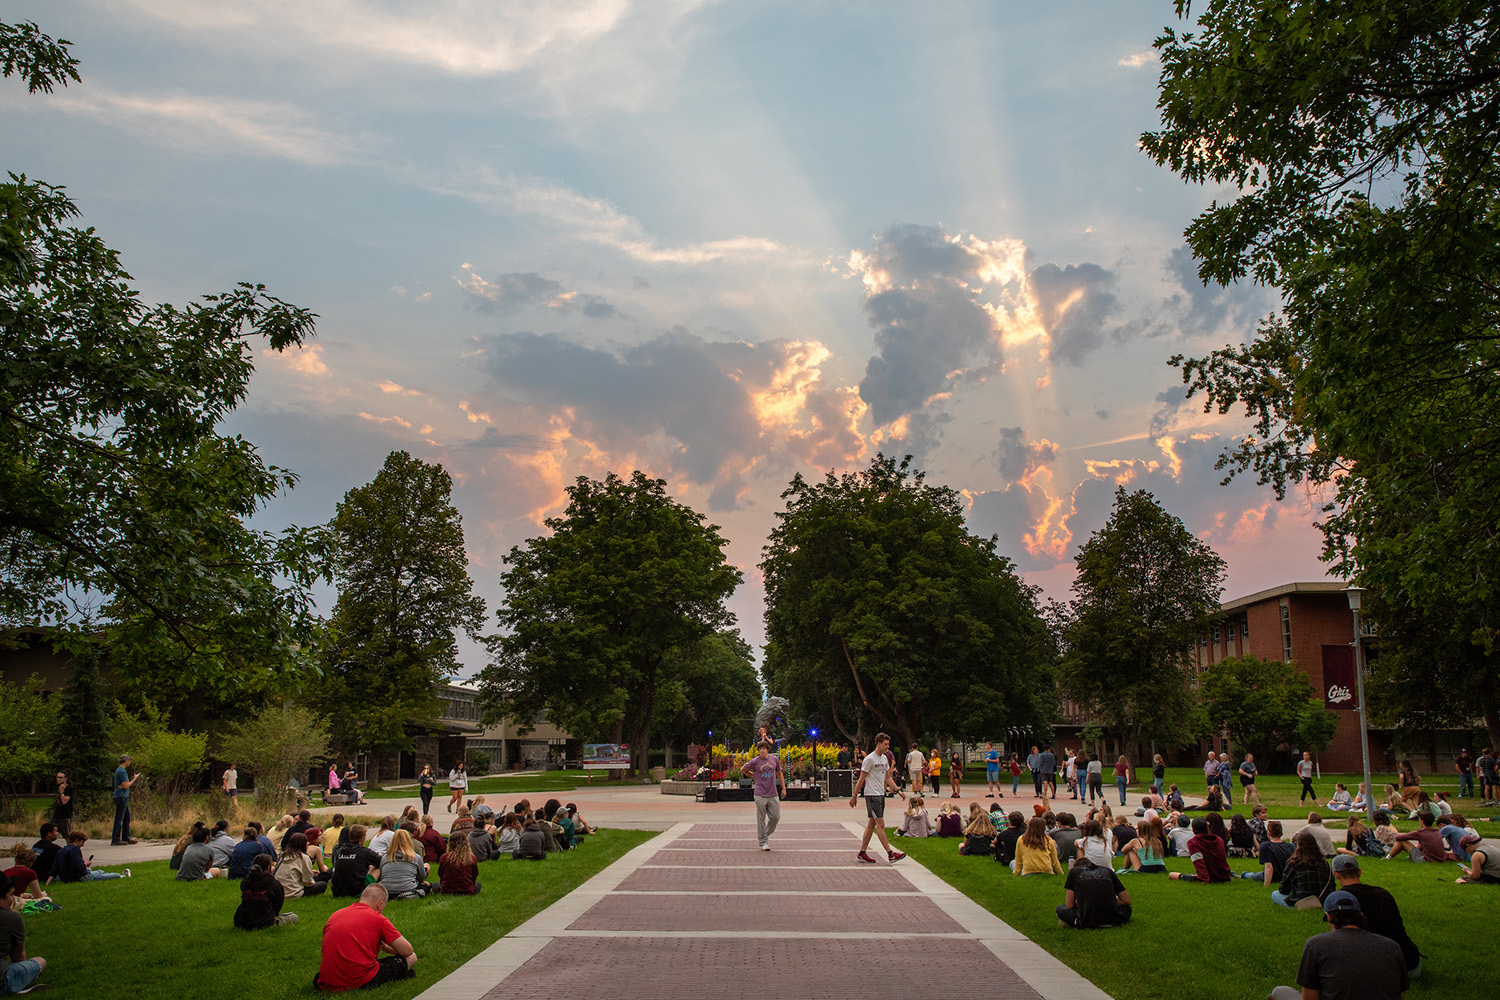 Students gather on the Oval for an evening Orientation event as a sunset lights up the sky